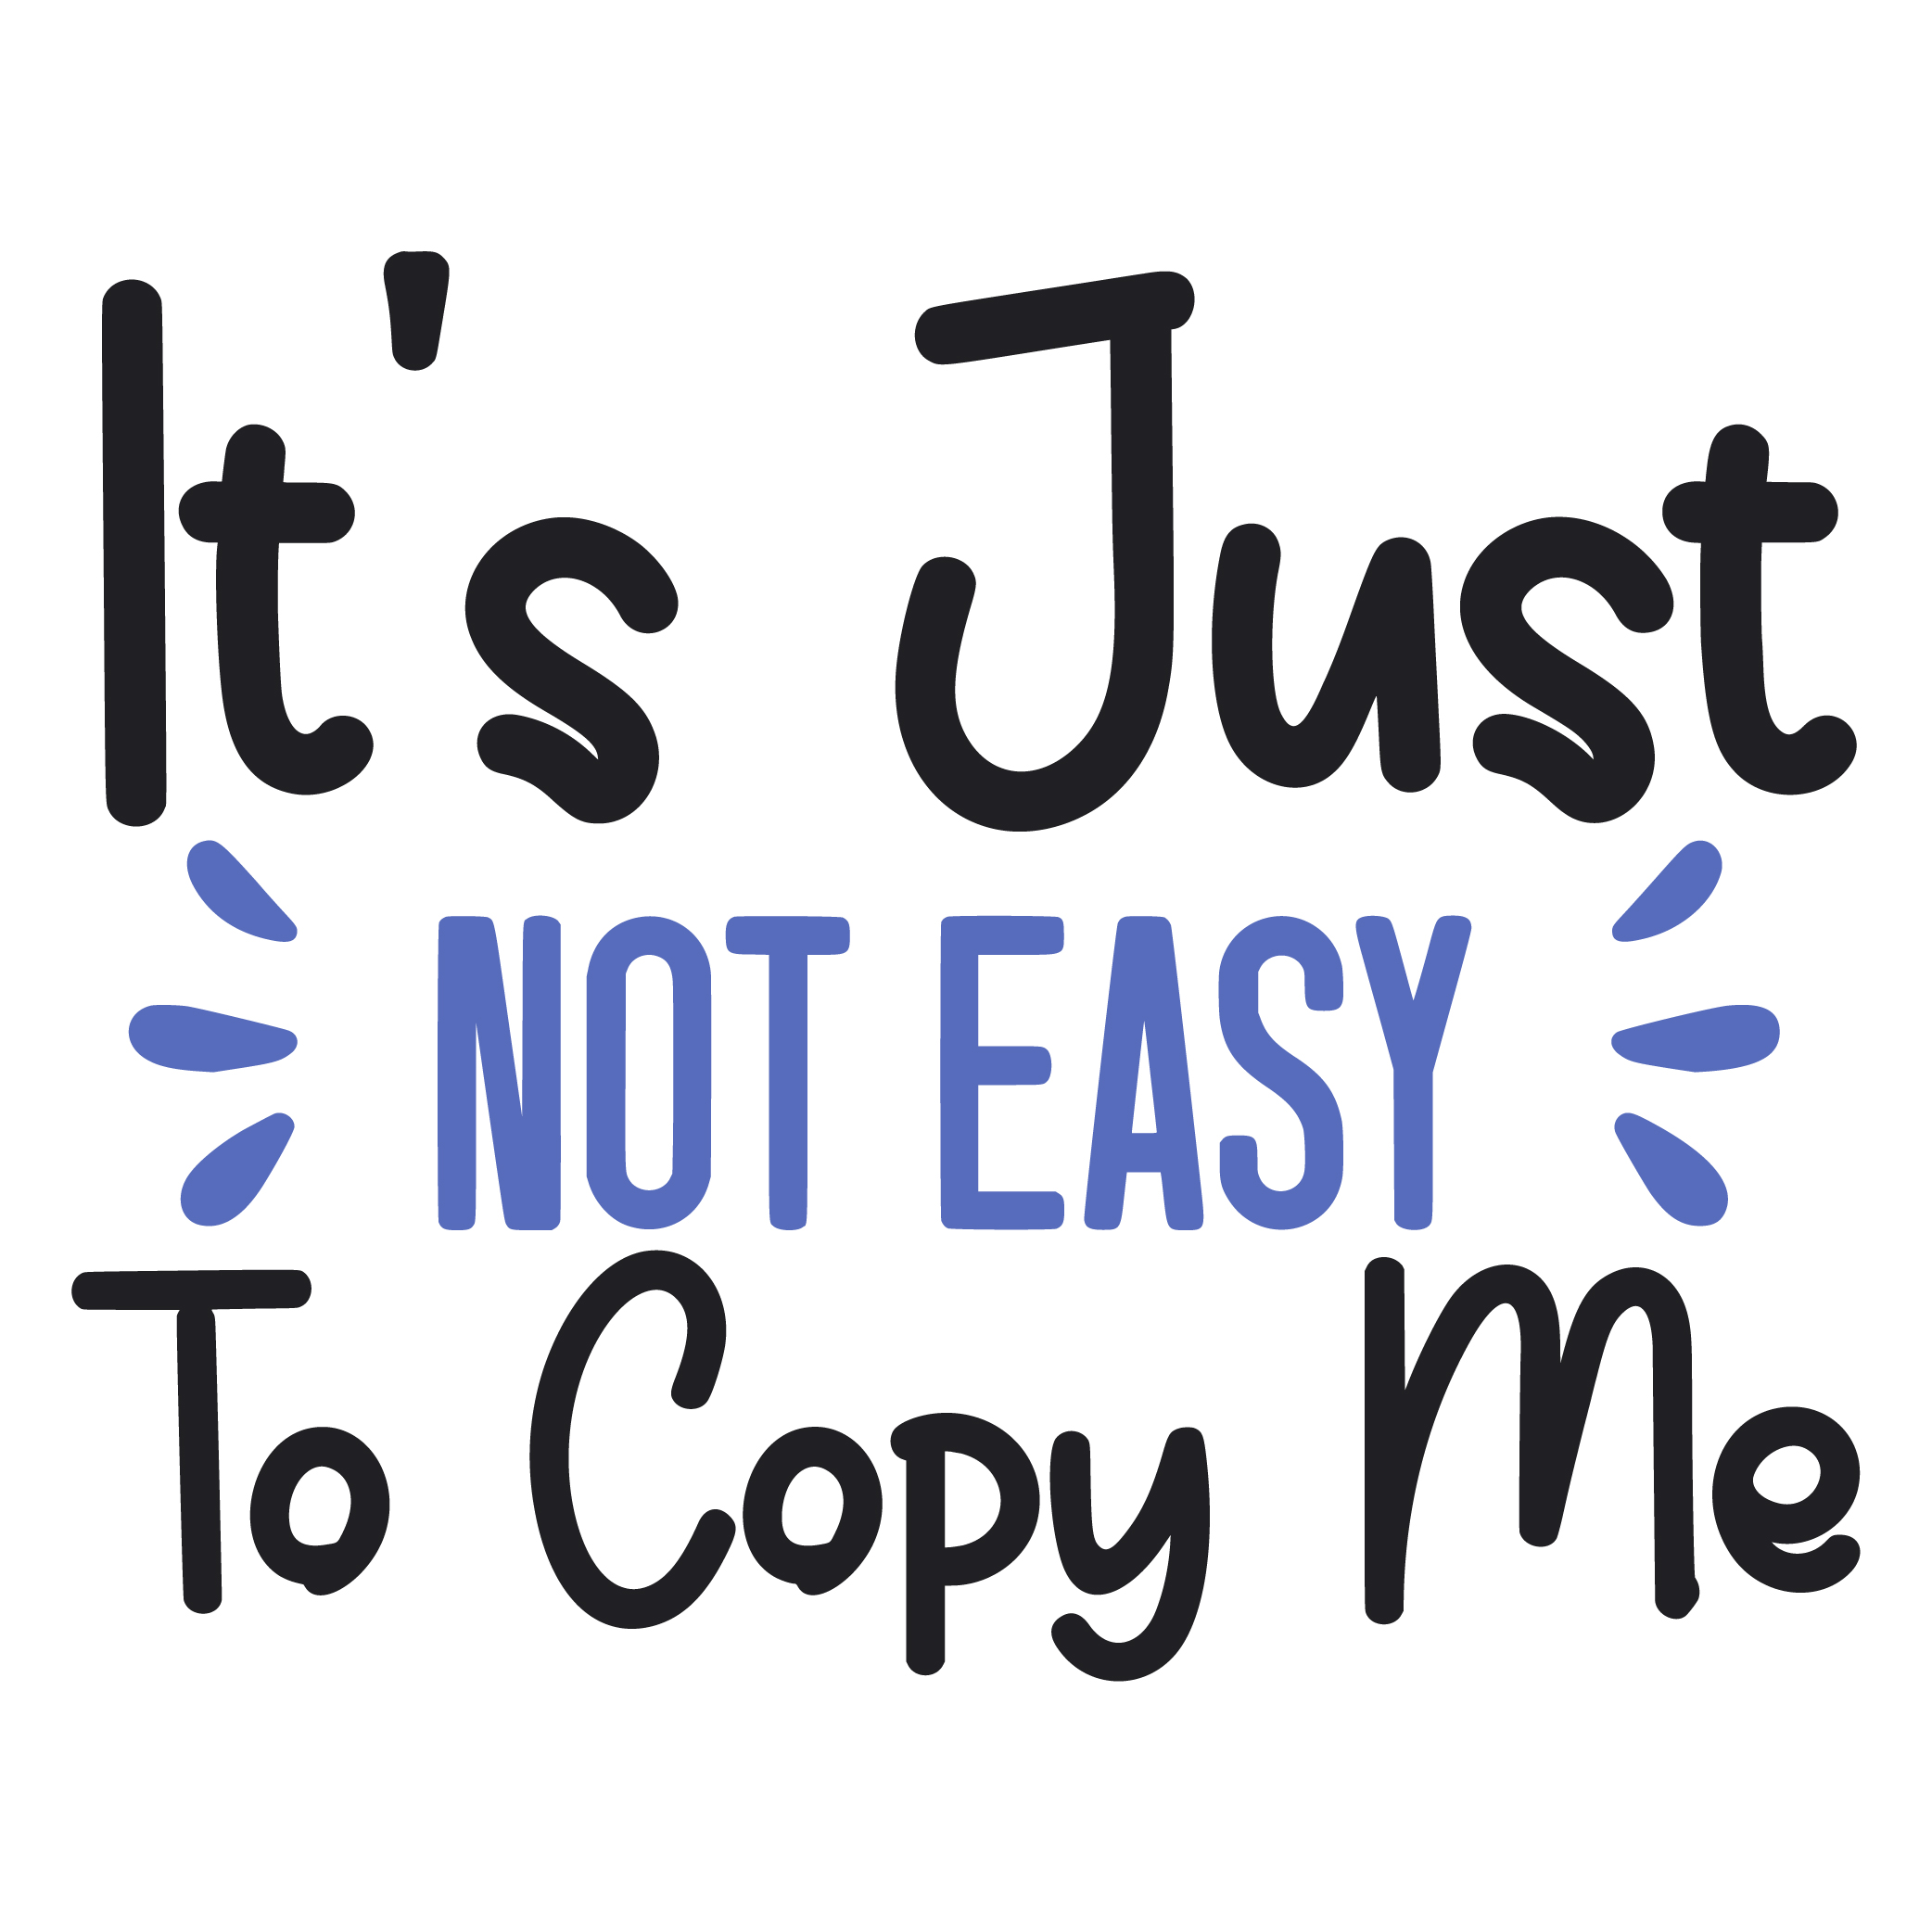 its just not easy to copy me woman SVG Boss Lady  Black Lives Matter  Lady Woman Diva Tshirt Cut File Cricut Silhouette Women Empowerment svg Feminism svg Girl Power 